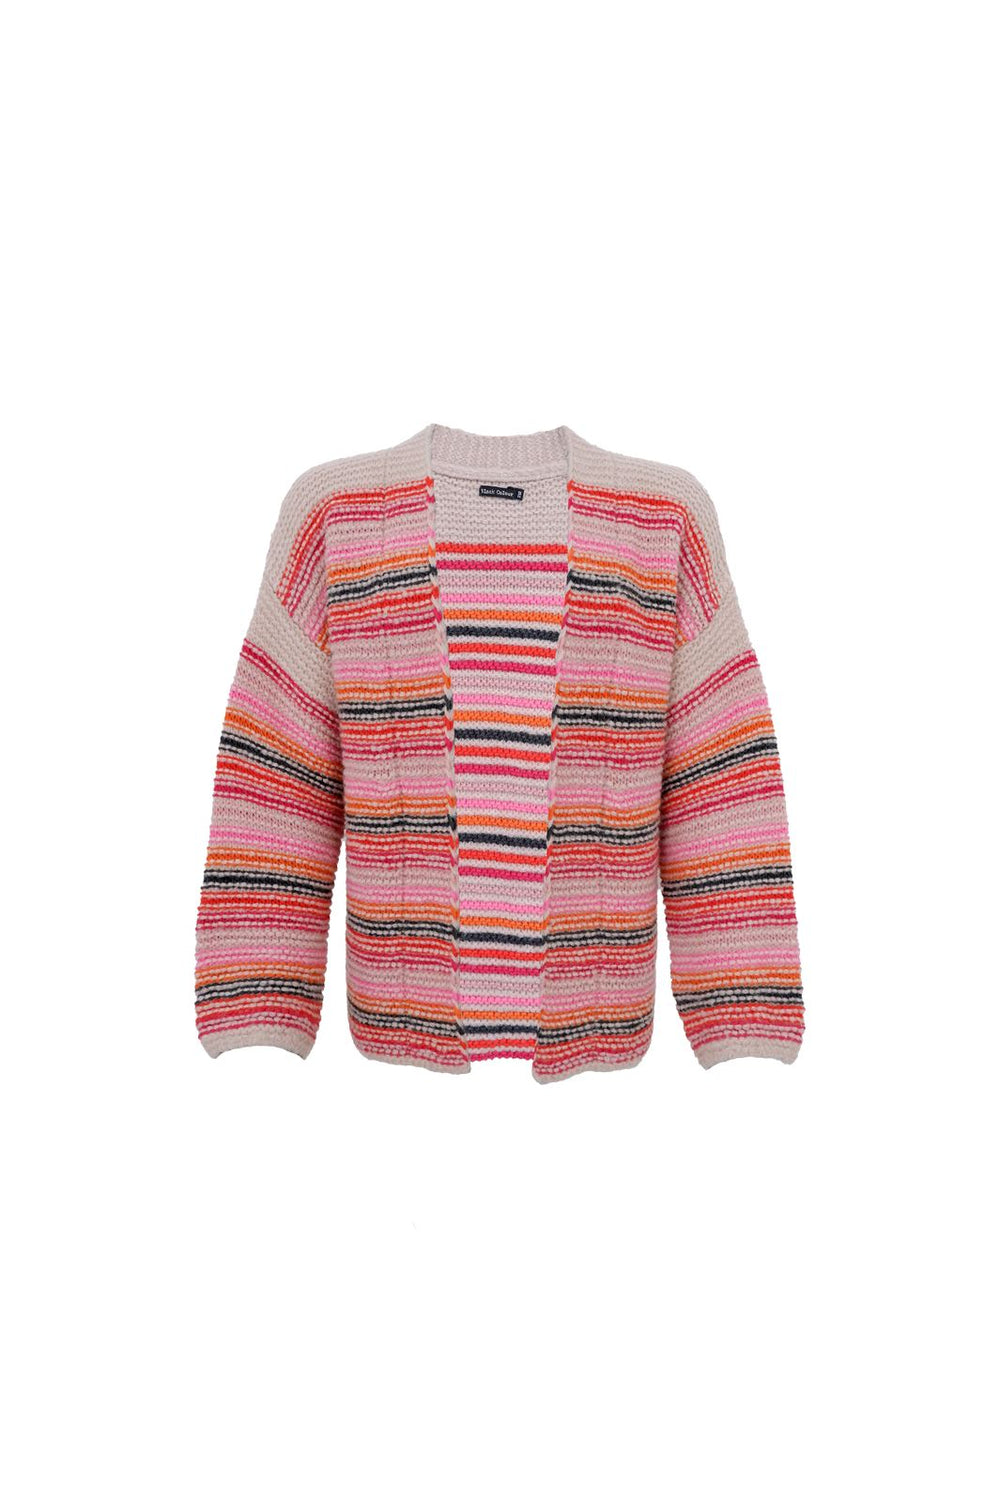 Black Colour - Bcgeorgia Knitted Cardigan - Pink Multi